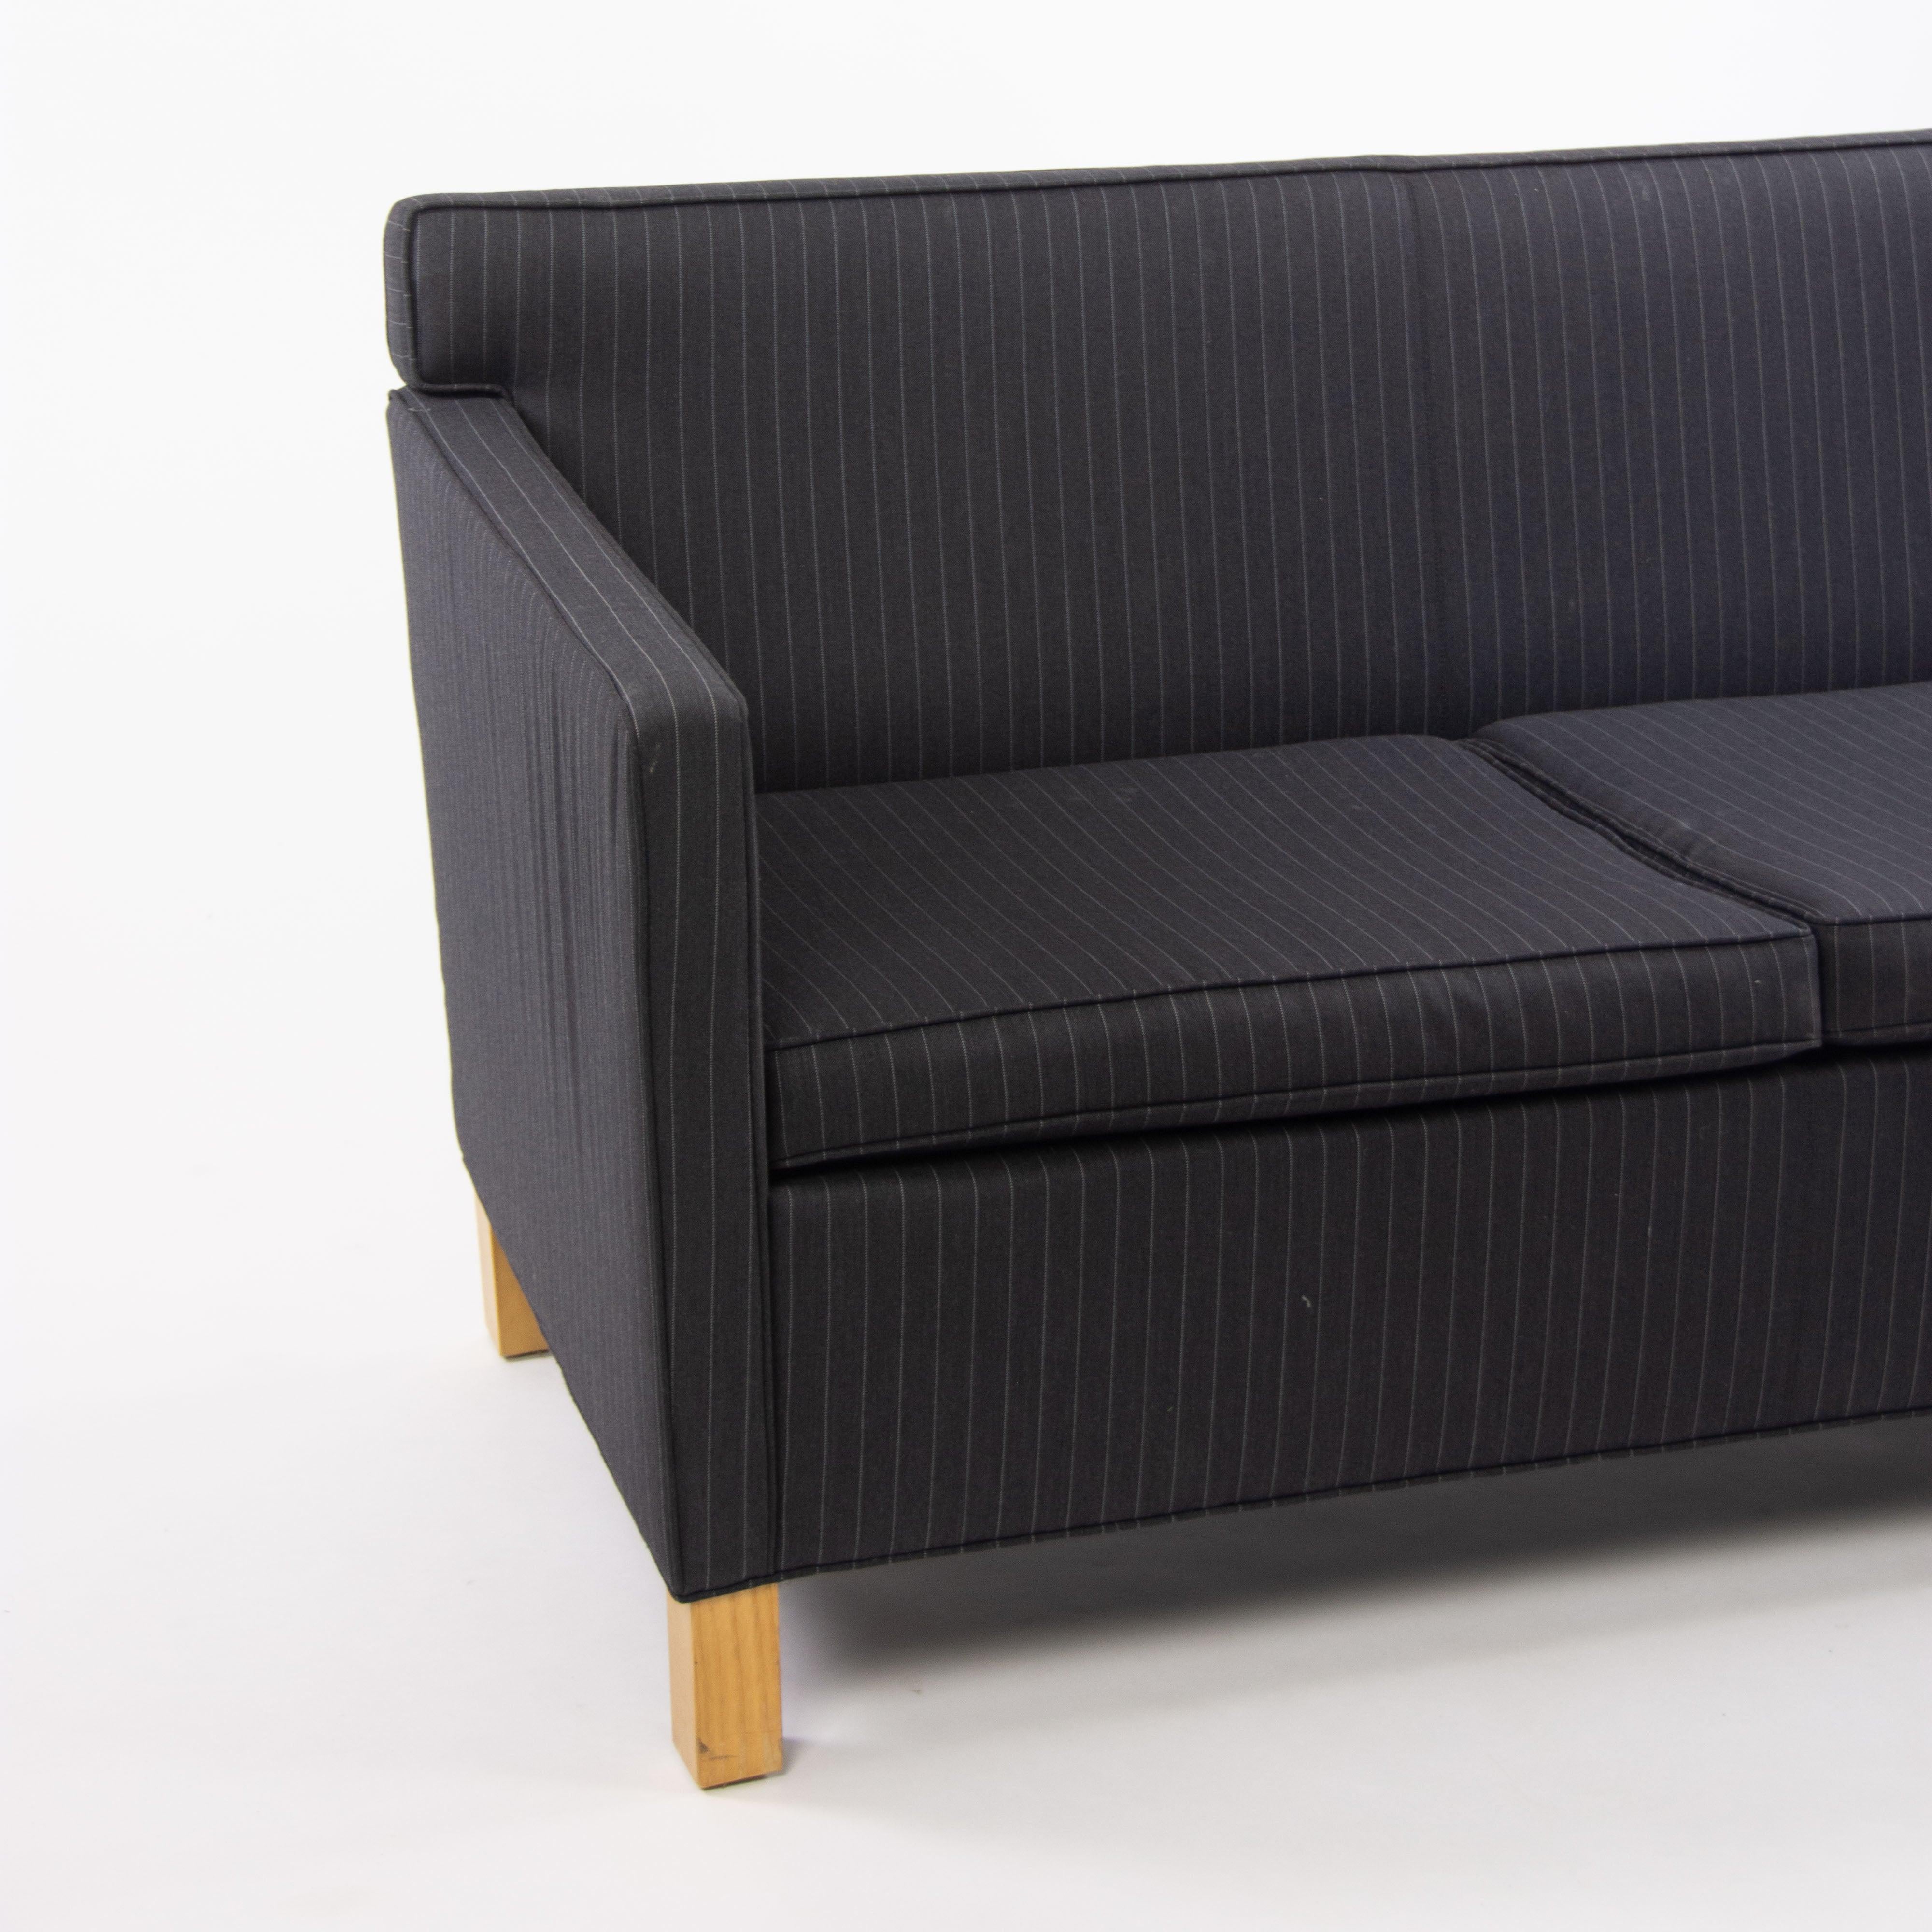 American 2010's Knoll Mies Van Der Rohe Krefeld Loveseat Sofa Fabric Sets Available For Sale